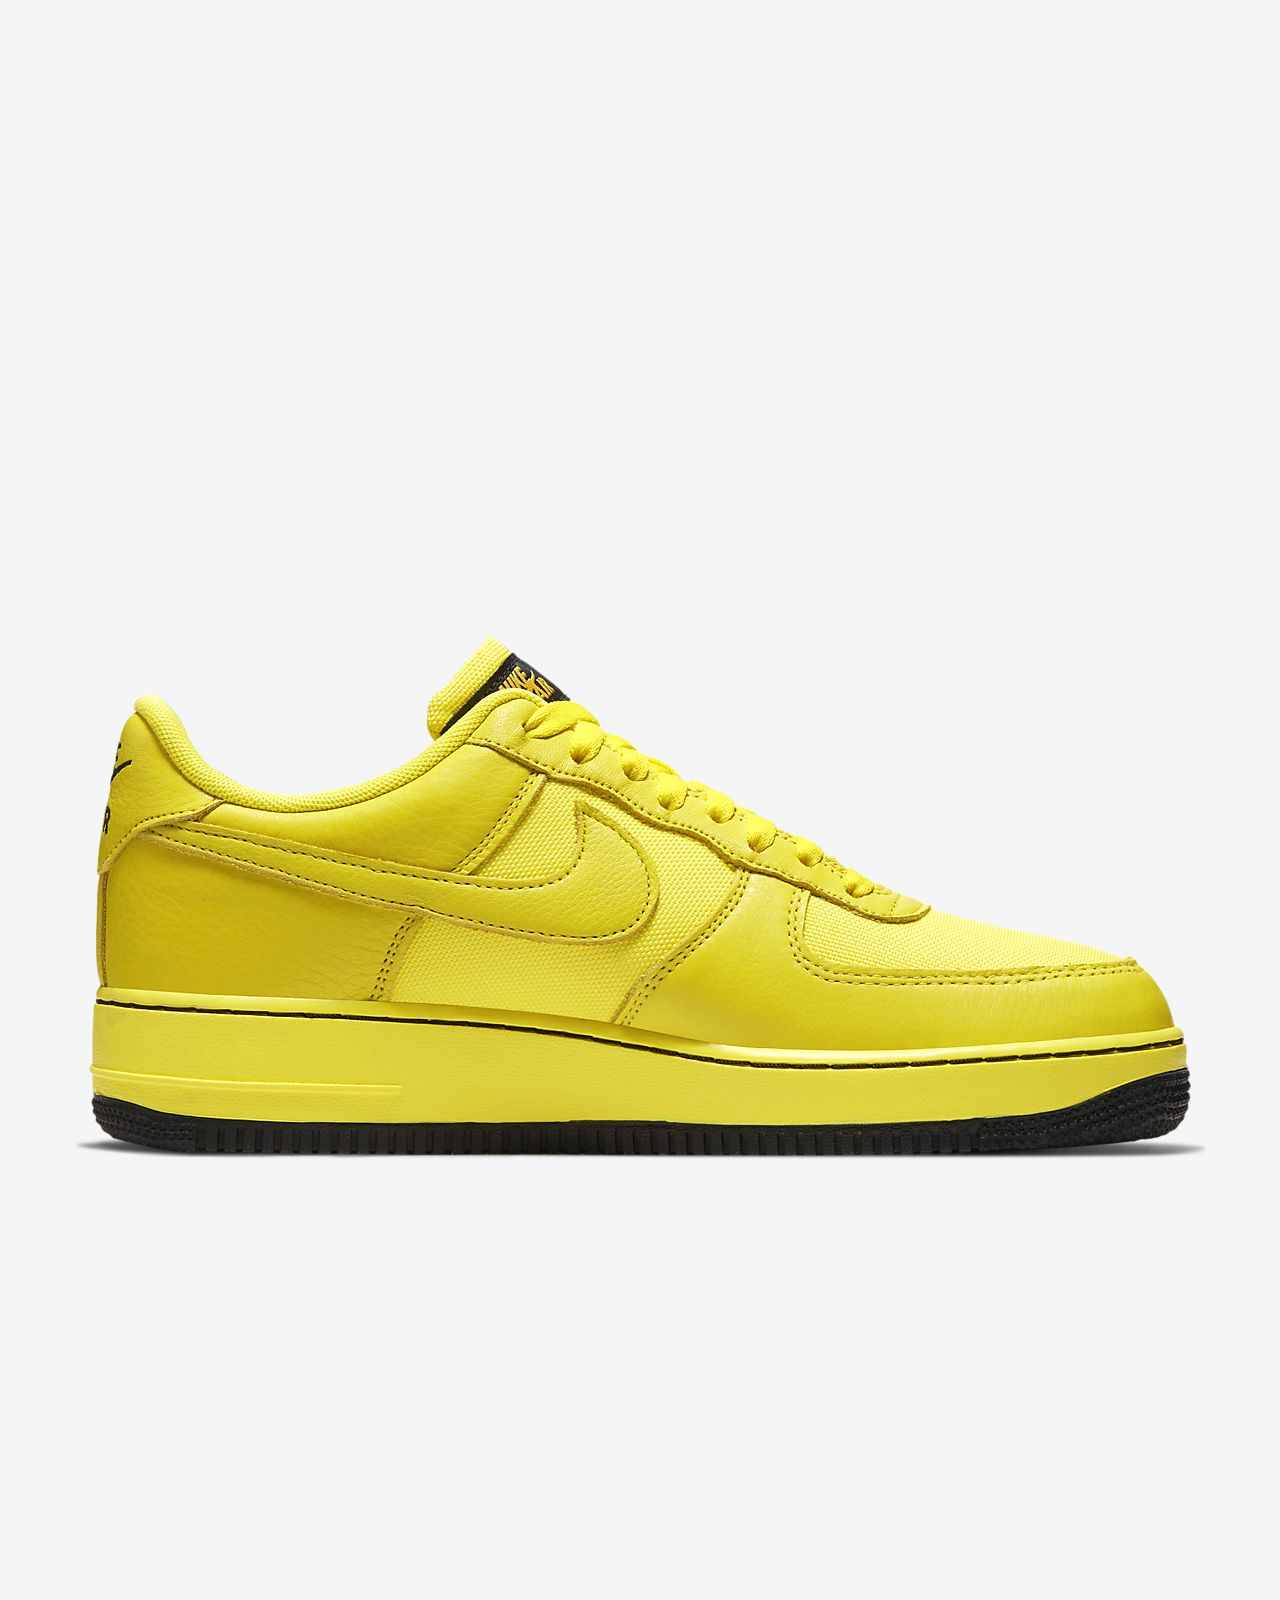 neon yellow airforces